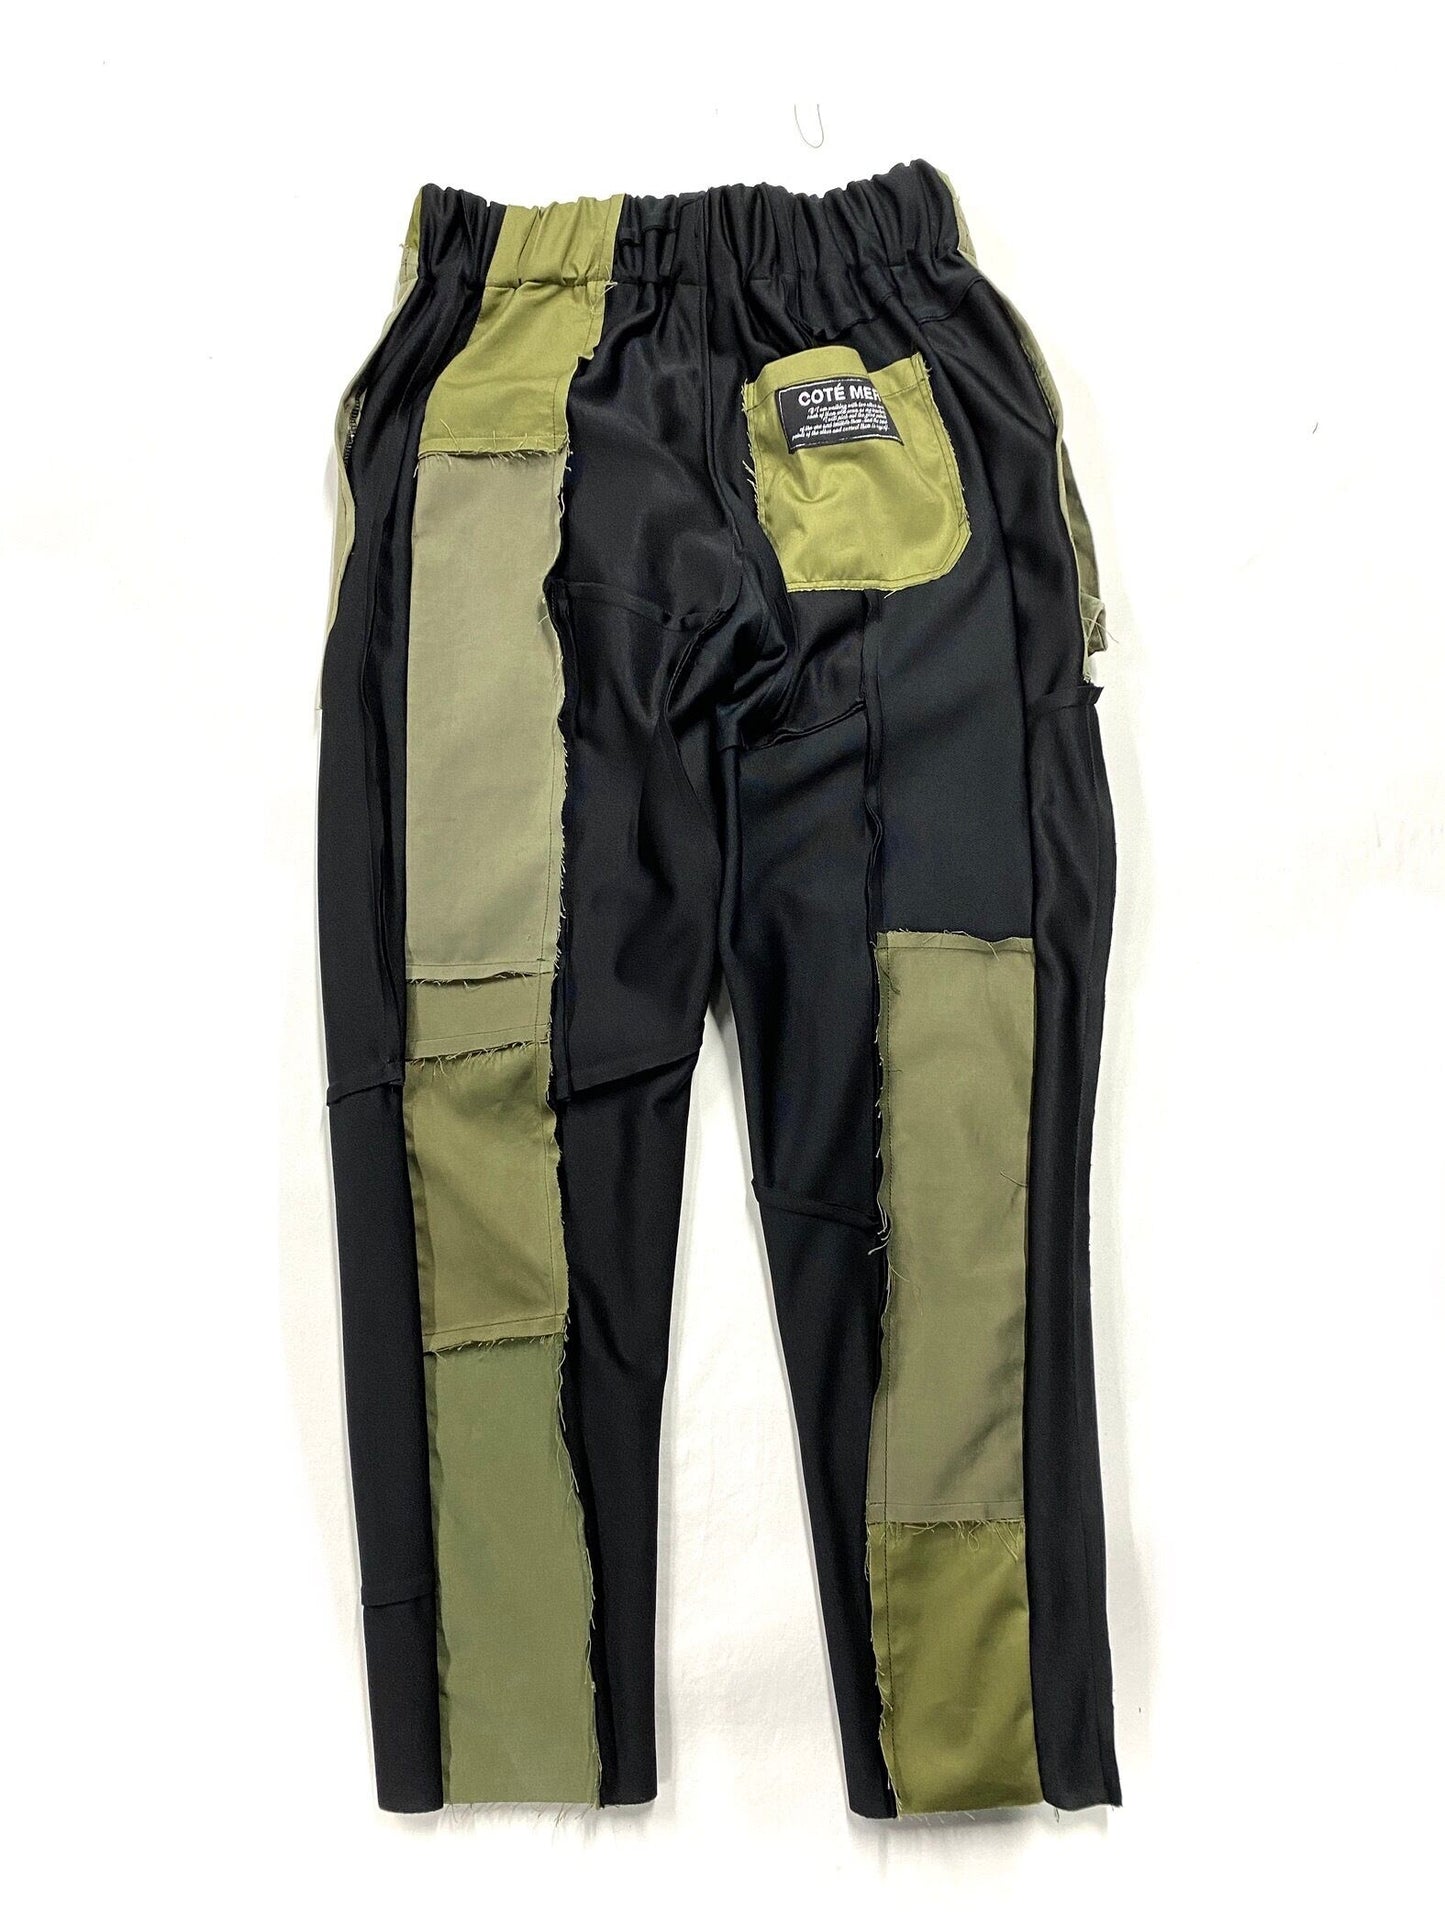 Bespoke Hypebeast Japanese Vintage Handmade Custom One and Only One Cote Mer Military Camo Khaki Fatigue Upcycle Sustainable Upscale Street Fashion Embroidered Embroidery Patch Work Boro Remake Pants Jeans Bottoms ( Size : L - XL )